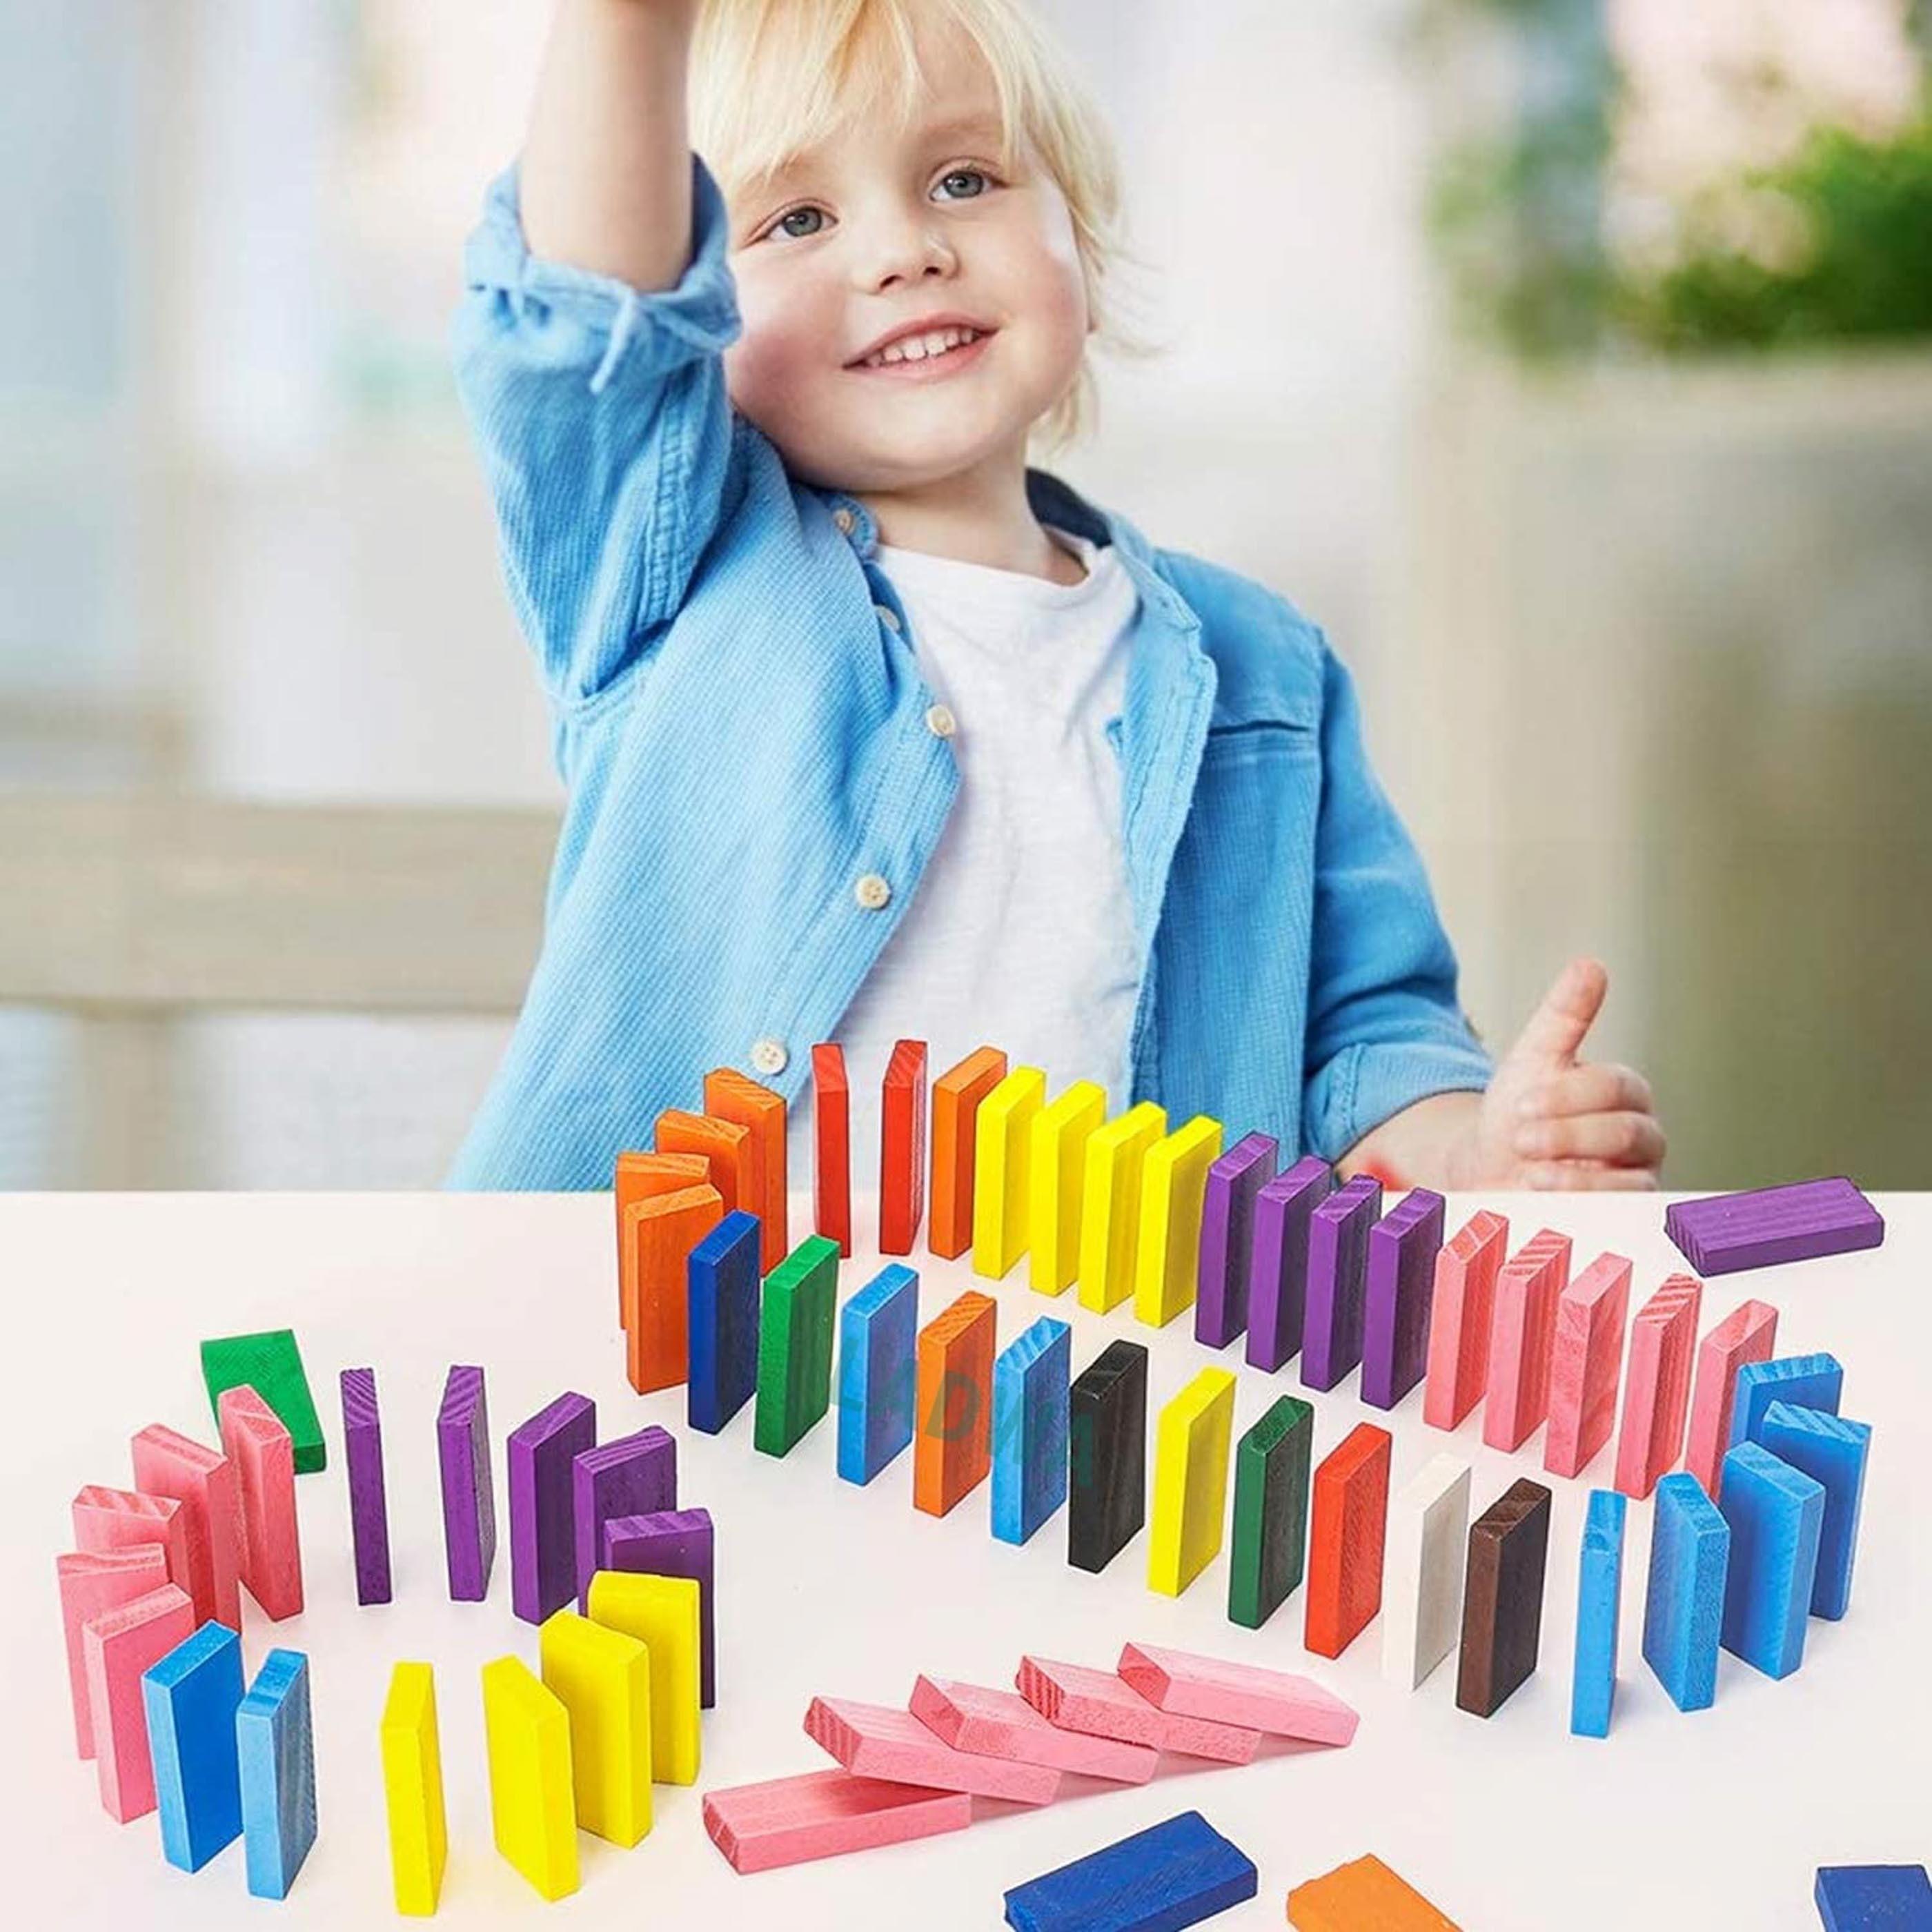 Details about   240pcs Wooden Dominos Blocks Set Educational Play Toy Racing Game 12 Colors 